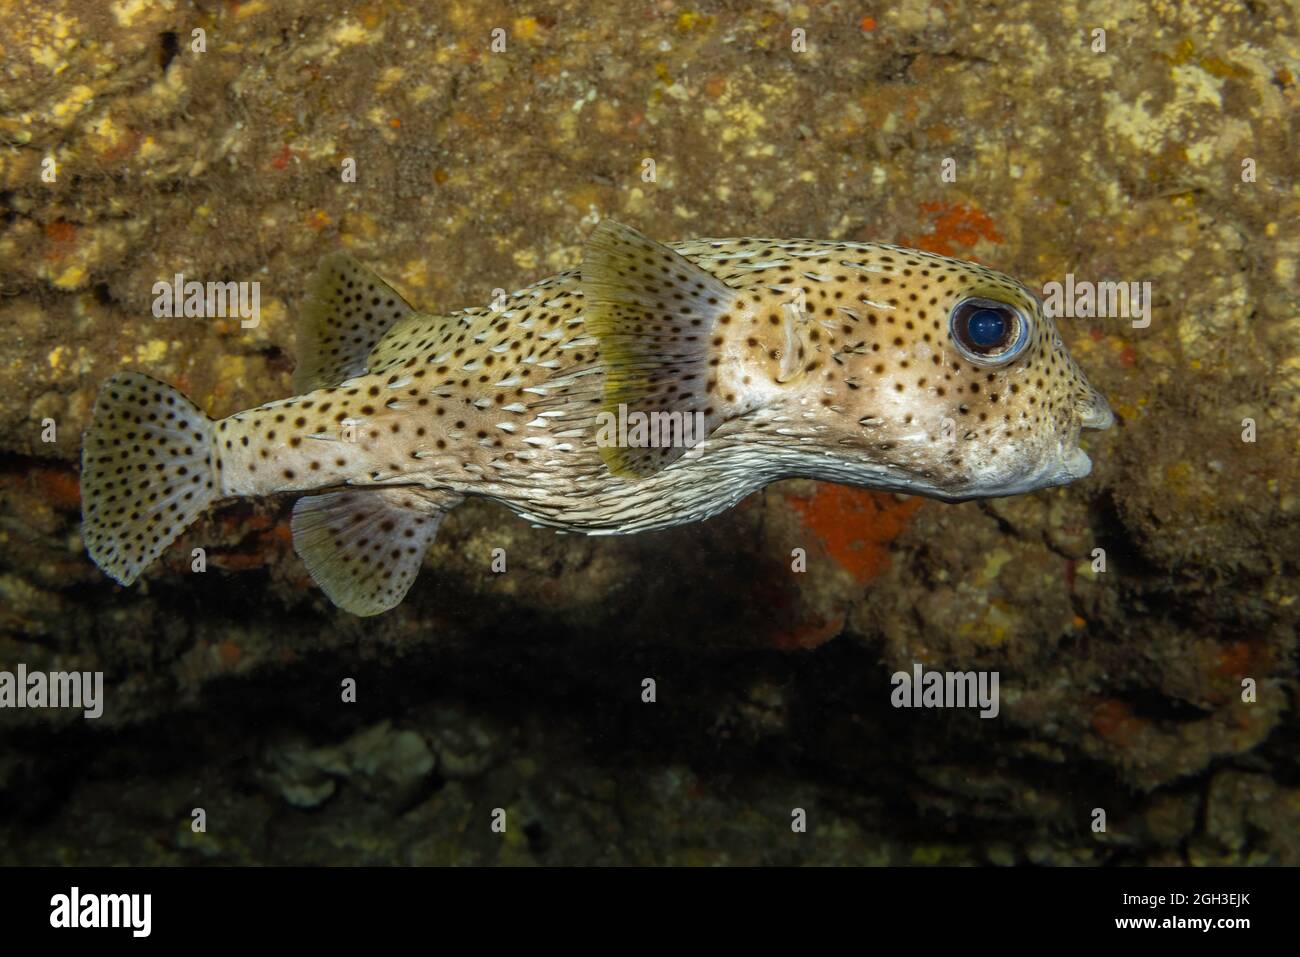 The spotted porcupinefish, Diodon hystrix, feed primarily at night on hard shelled invertebrates.  Hawaii. Stock Photo